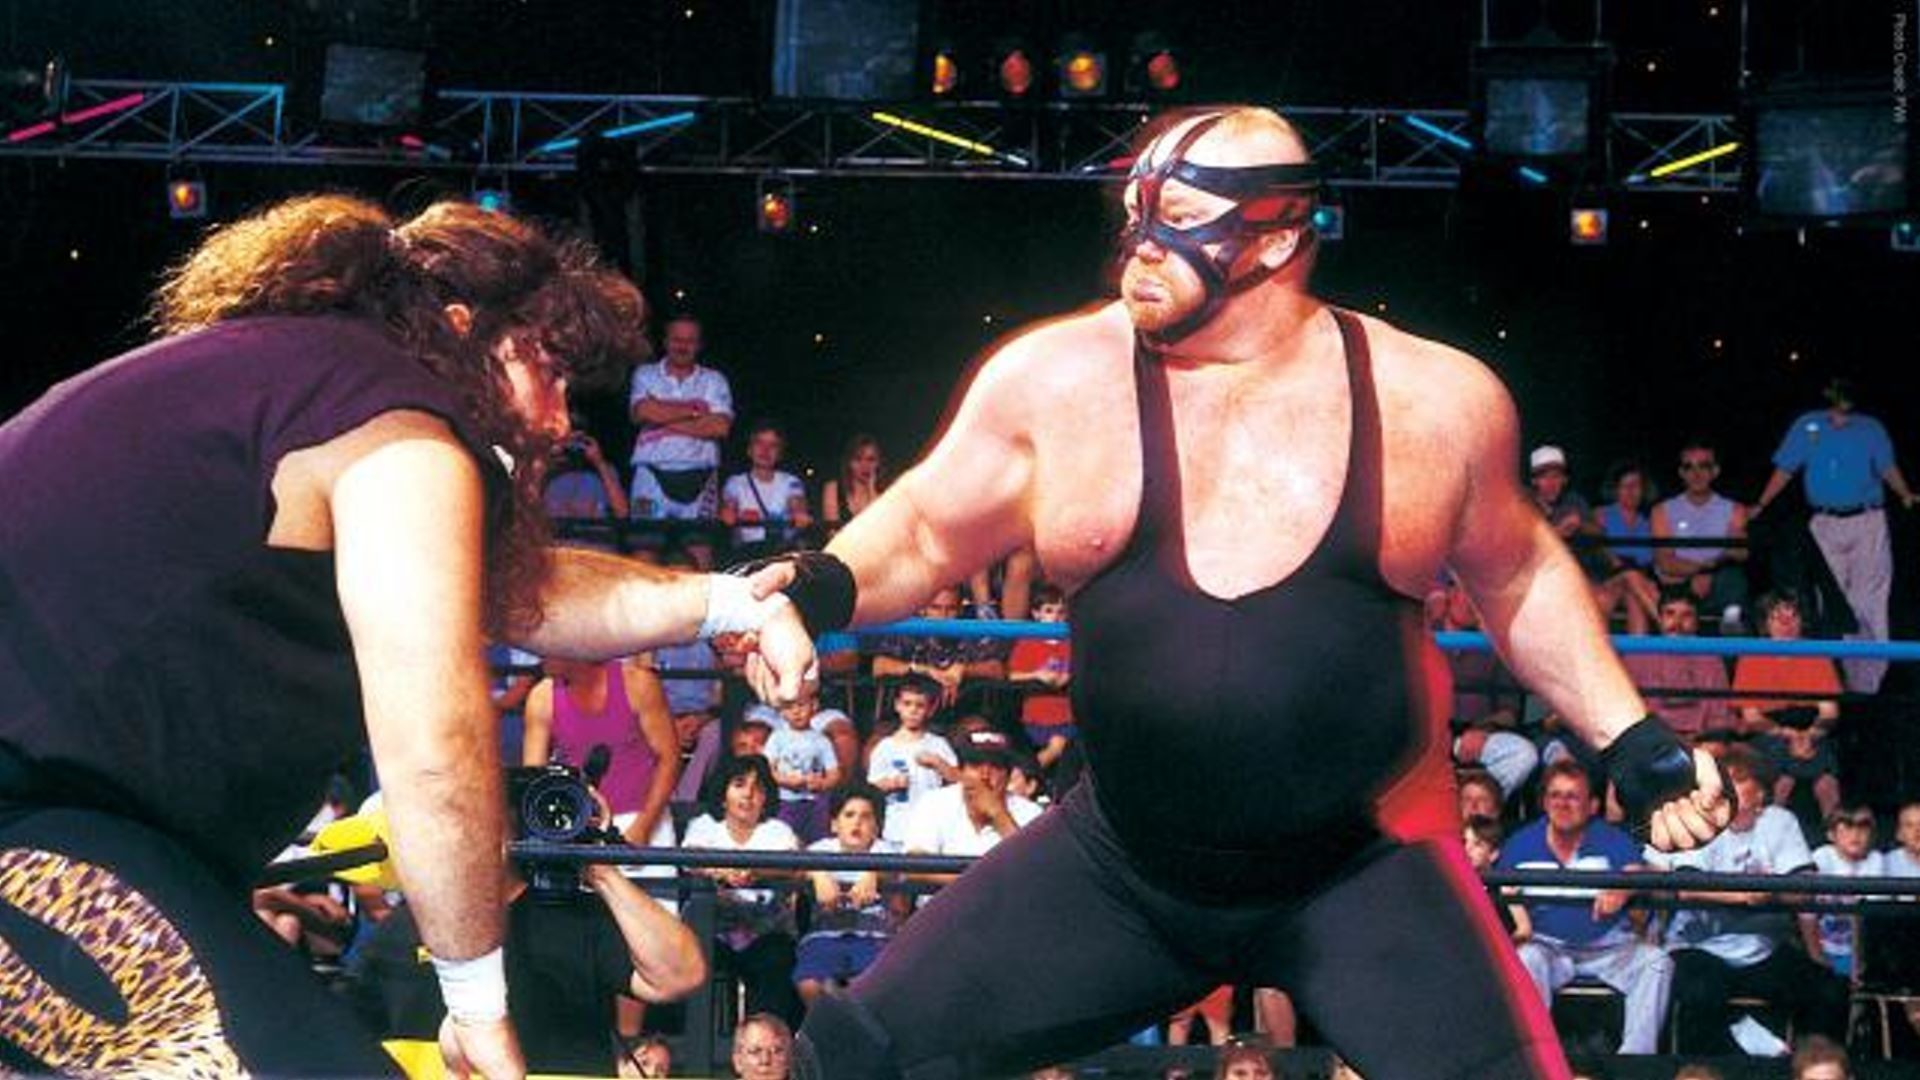 1920x1080 Daily Pro Wrestling History (10/24): Vader vs. Cactus Jack at WCW Halloween  Havoc